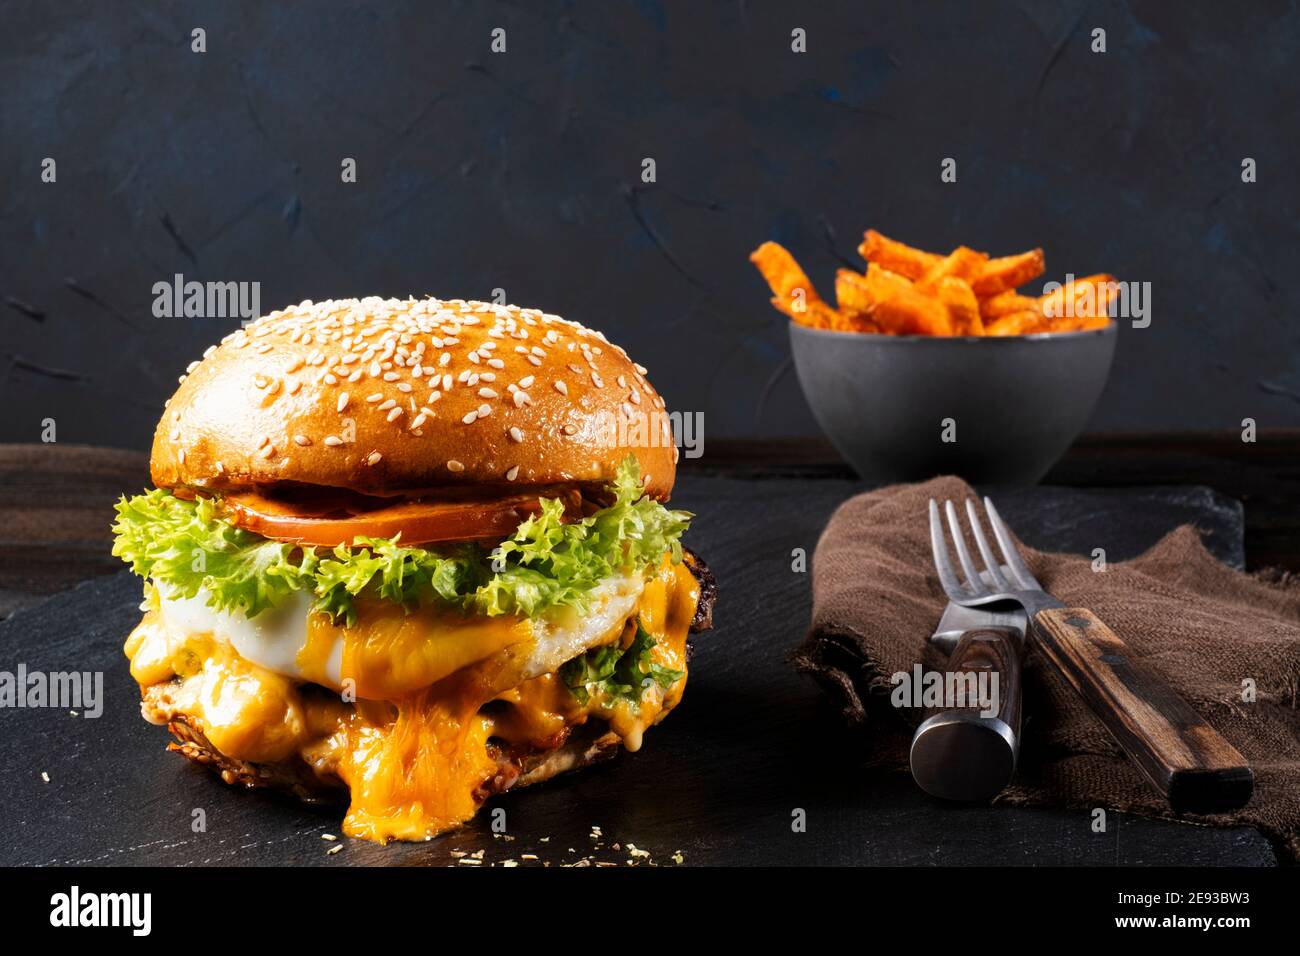 Juicy cheeseburger with egg arranged on a black skipper plate with cutlery and sweet potato fries, black background, text free space, Stock Photo